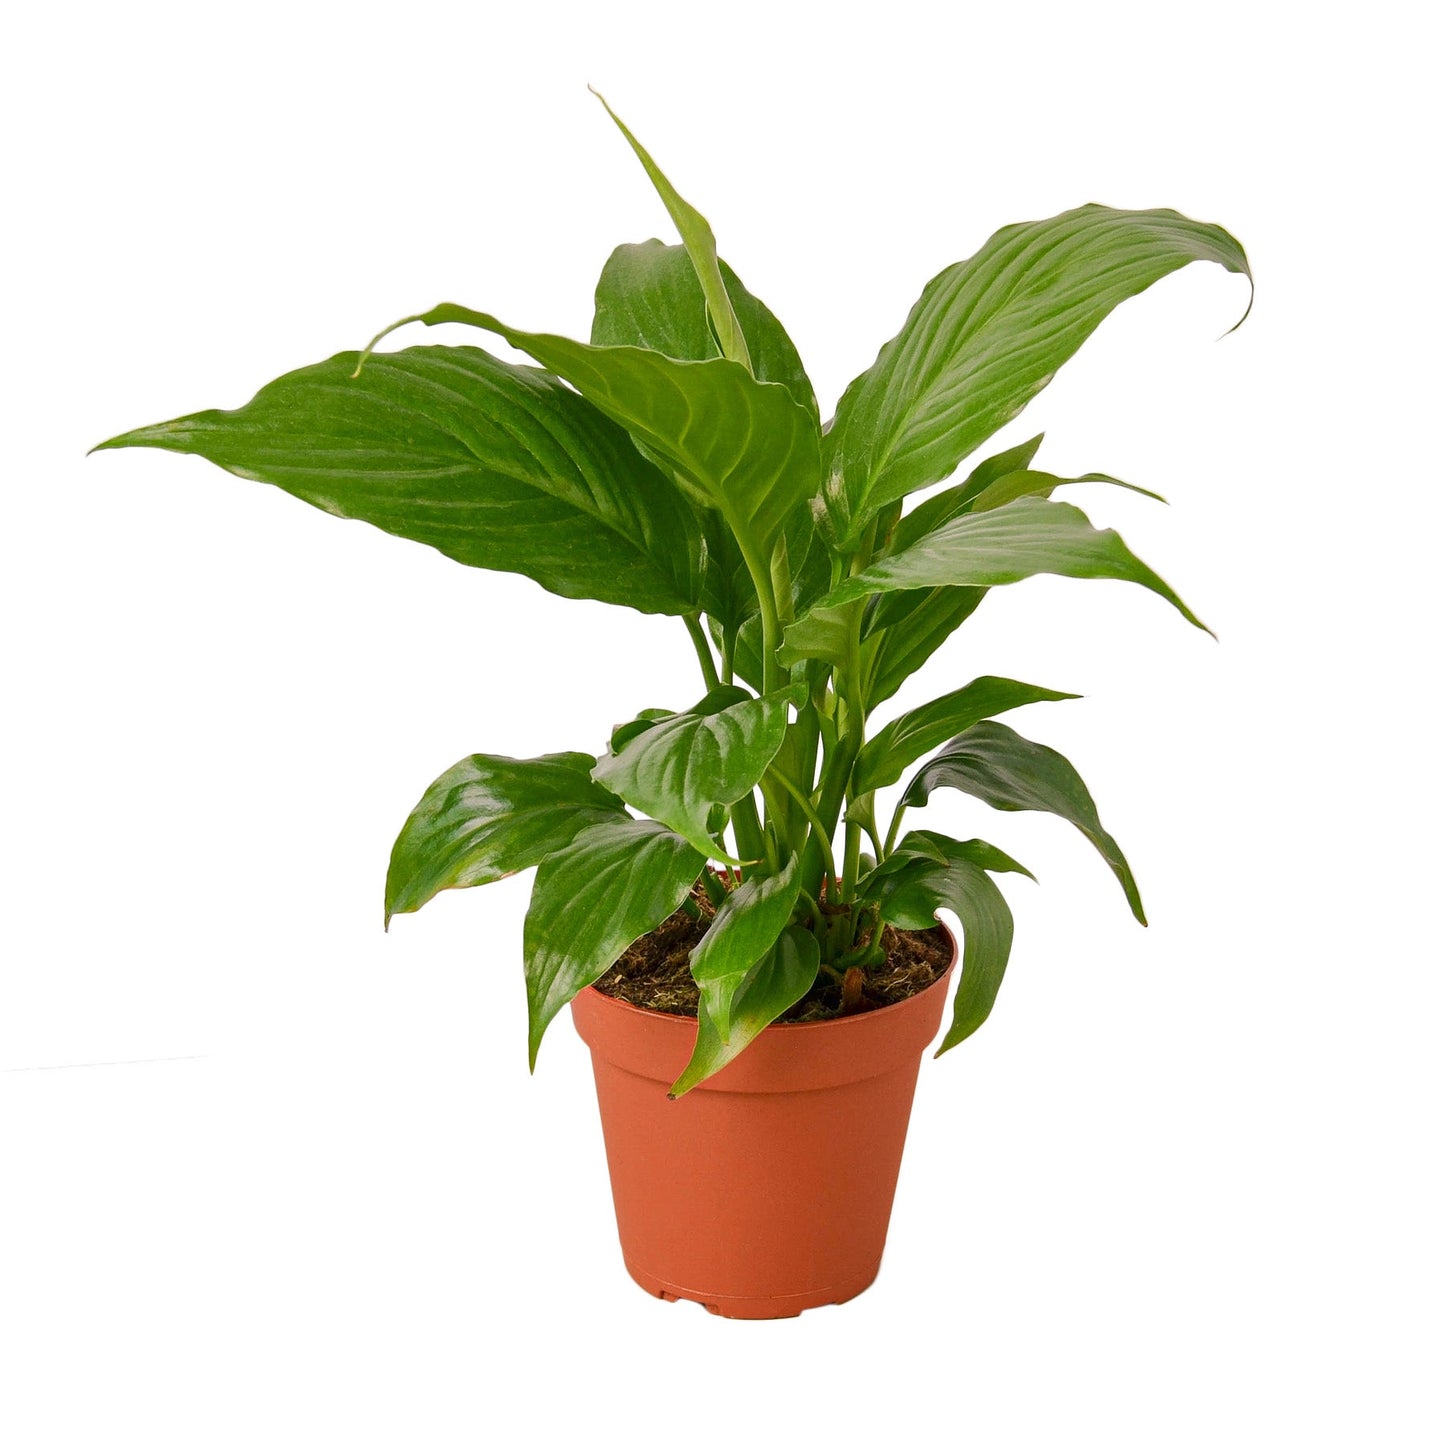 The Peace Lily - Easy Care, Air-Purifying Indoor Plant with Stunning Flowers